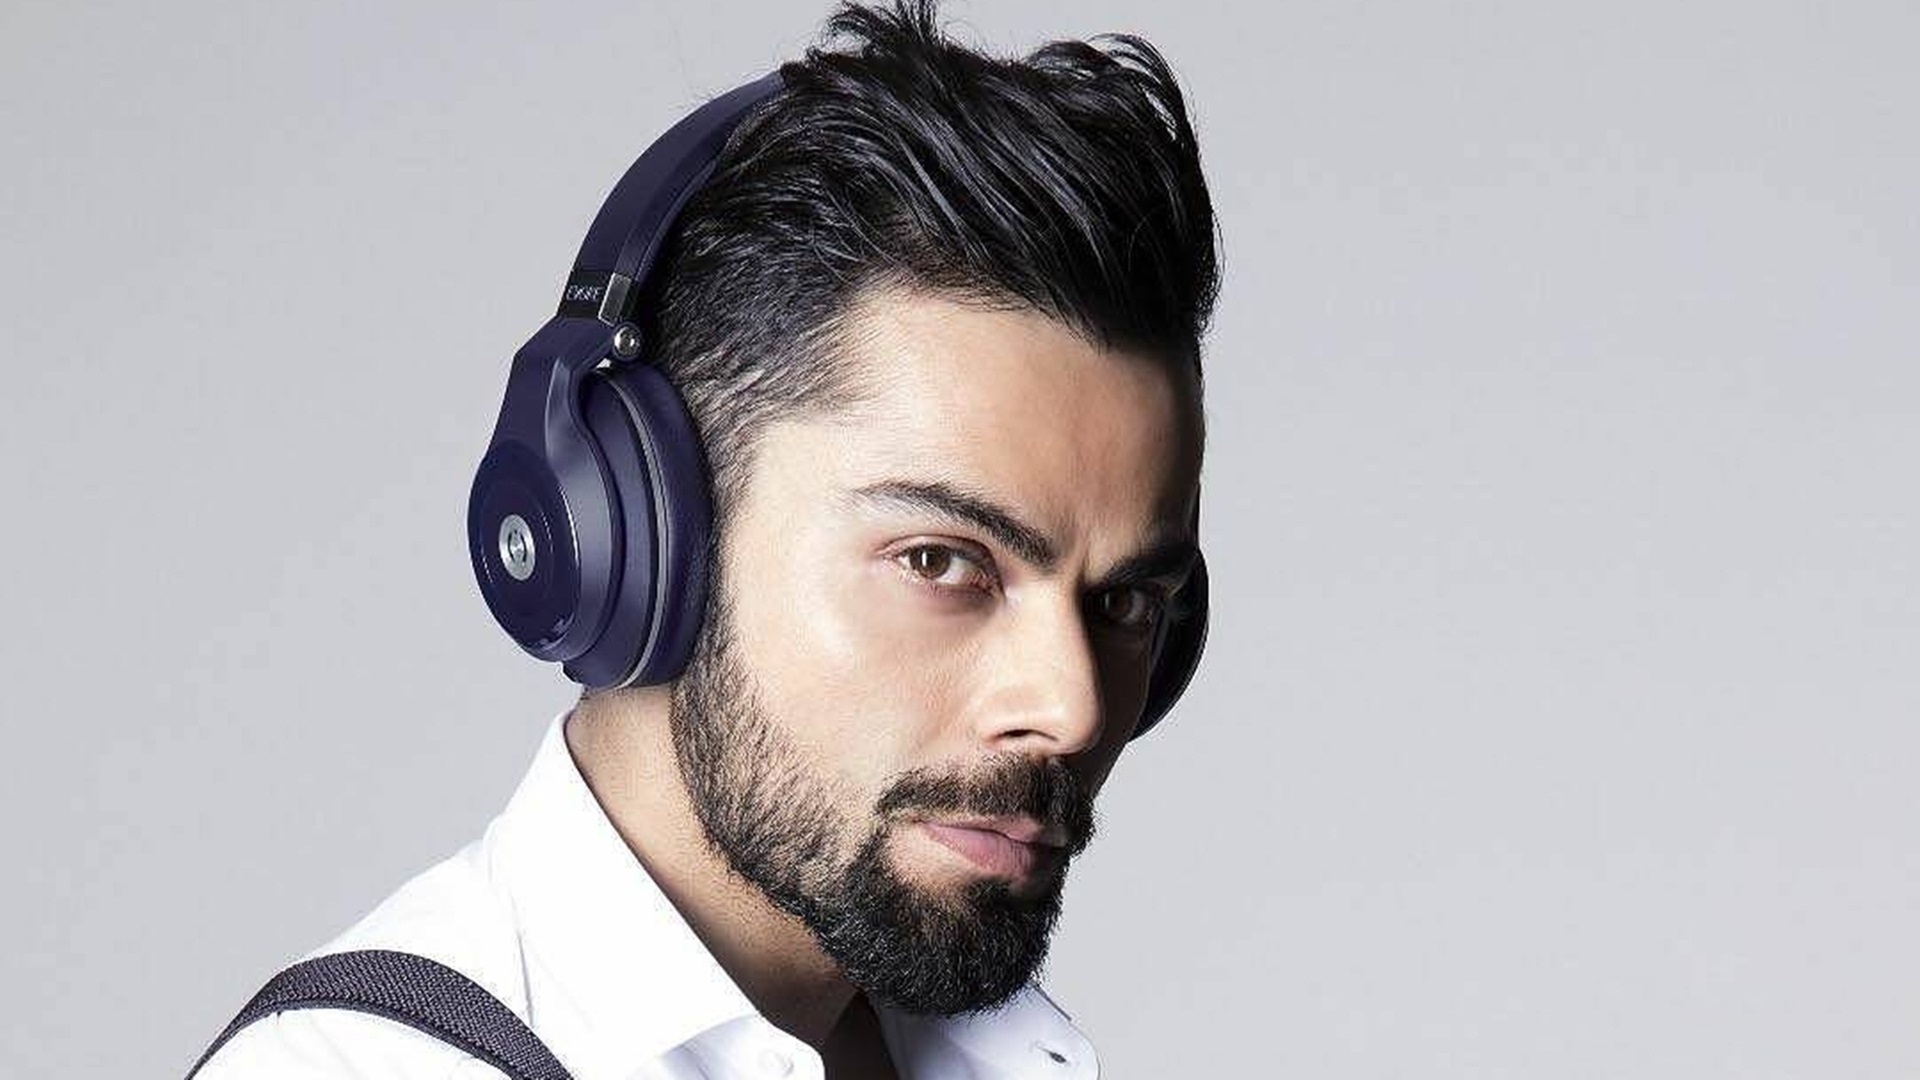 Virat Kohli Listen Music Style Wallpaper, HD Sports 4K Wallpapers, Images,  Photos and Background - Wallpapers Den